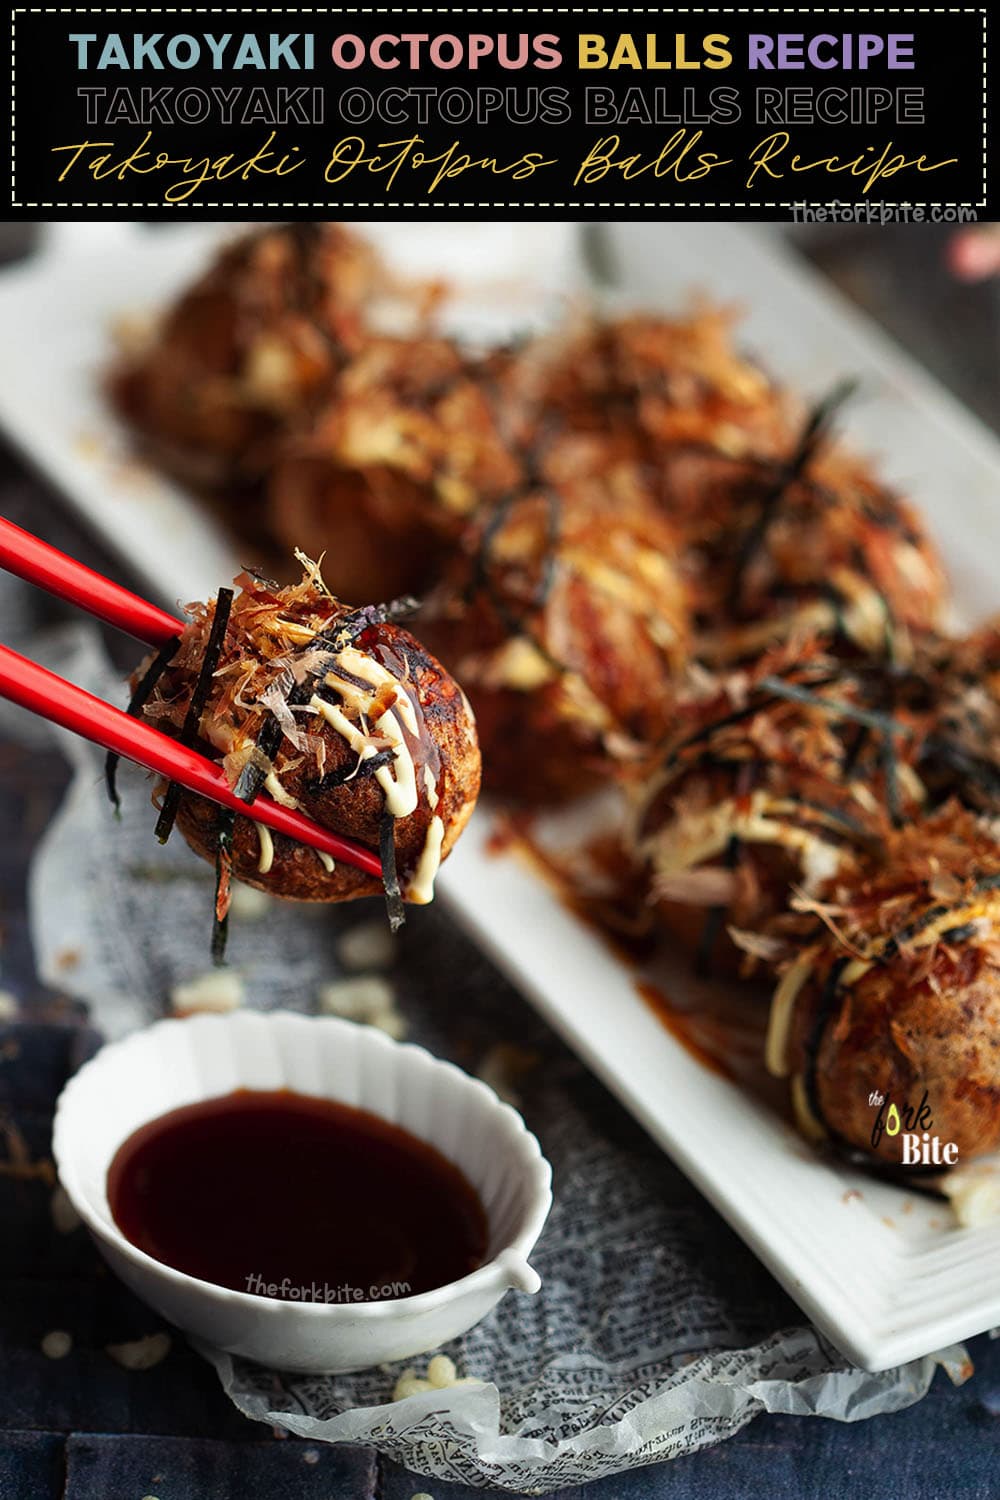 If you enjoy unique blends, flavors, and exotic foods, you are sure to love Takoyaki octopus balls.